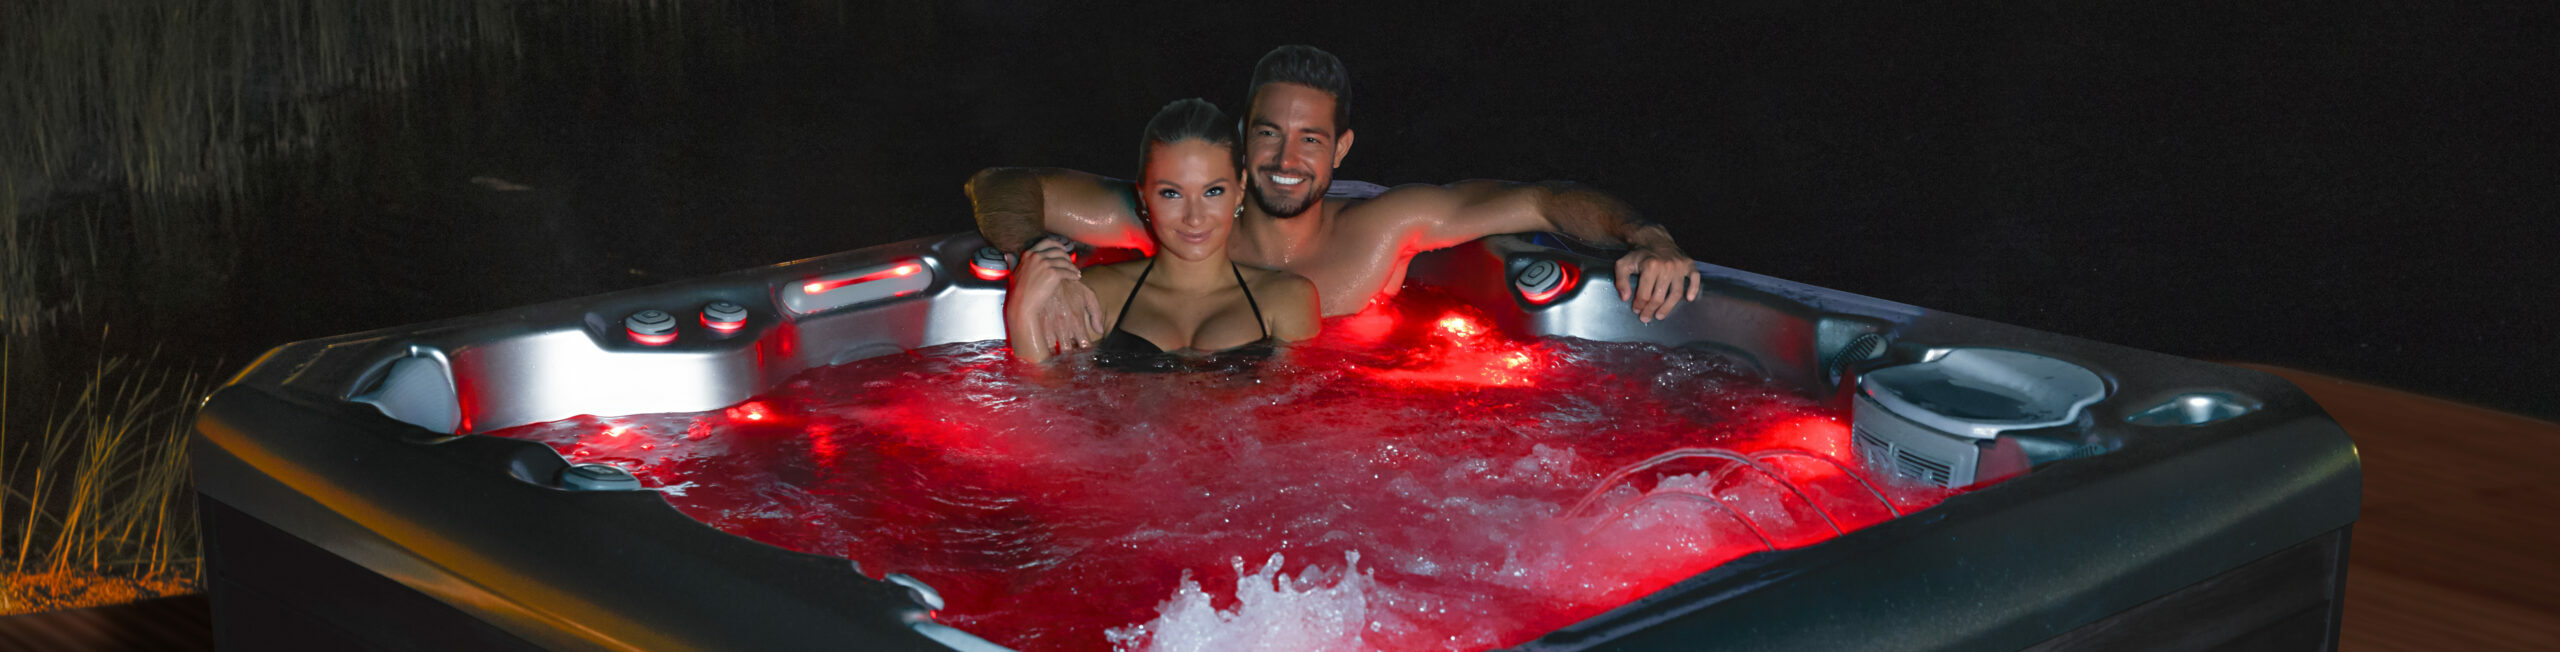 Set the Mood in Your Hot Tub with LED Lights